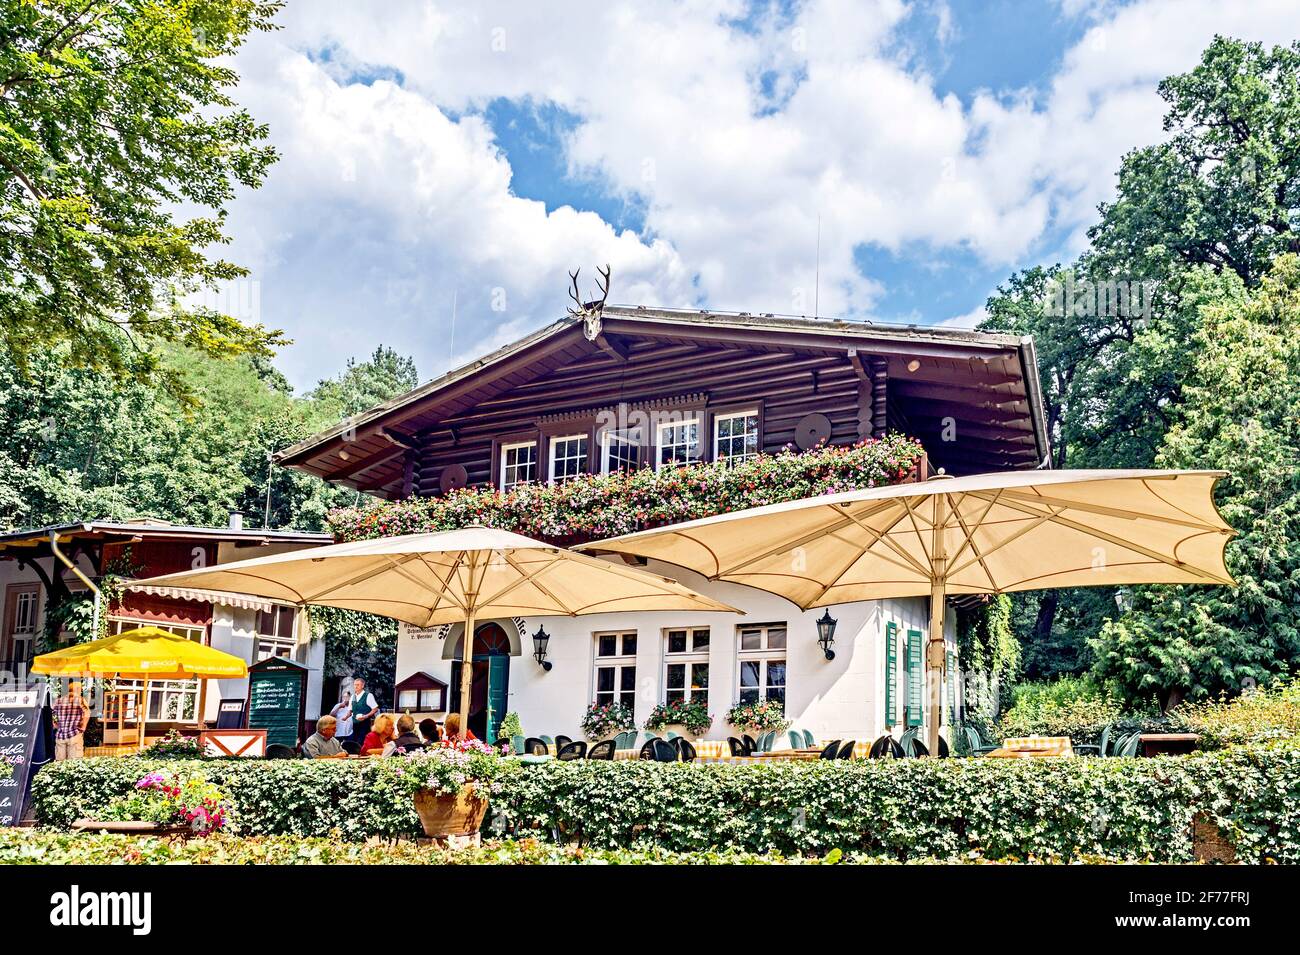 Berlin: Restaurant Moorlake near the river Havel in the Grunewald, a forest in the southwest of the city Stock Photo